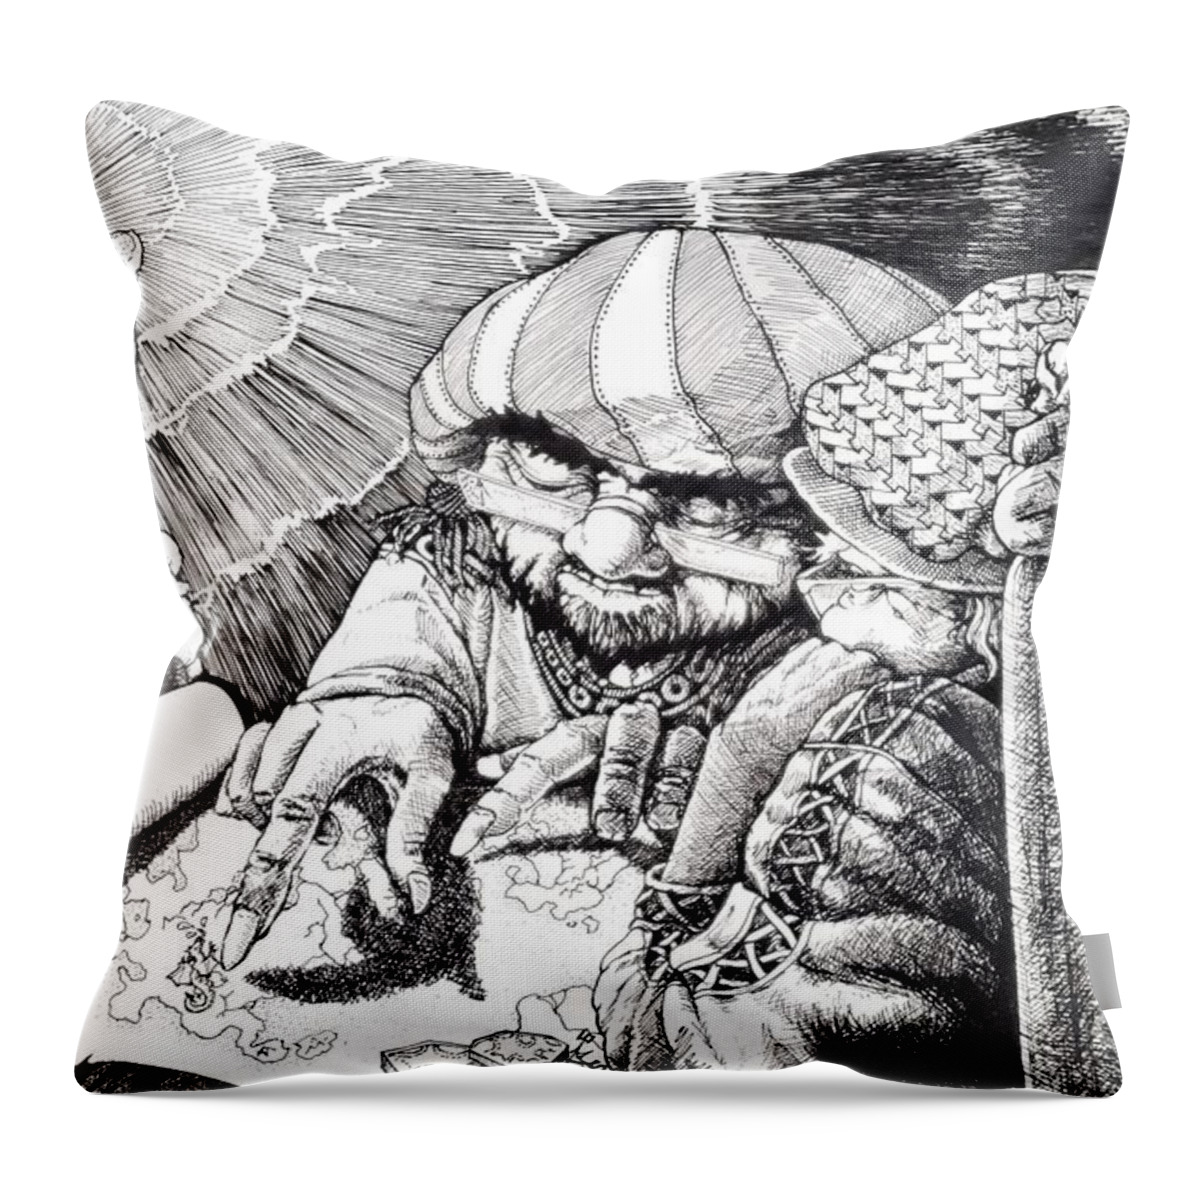 Dragons Throw Pillow featuring the drawing Here Be Dragons by Merana Cadorette